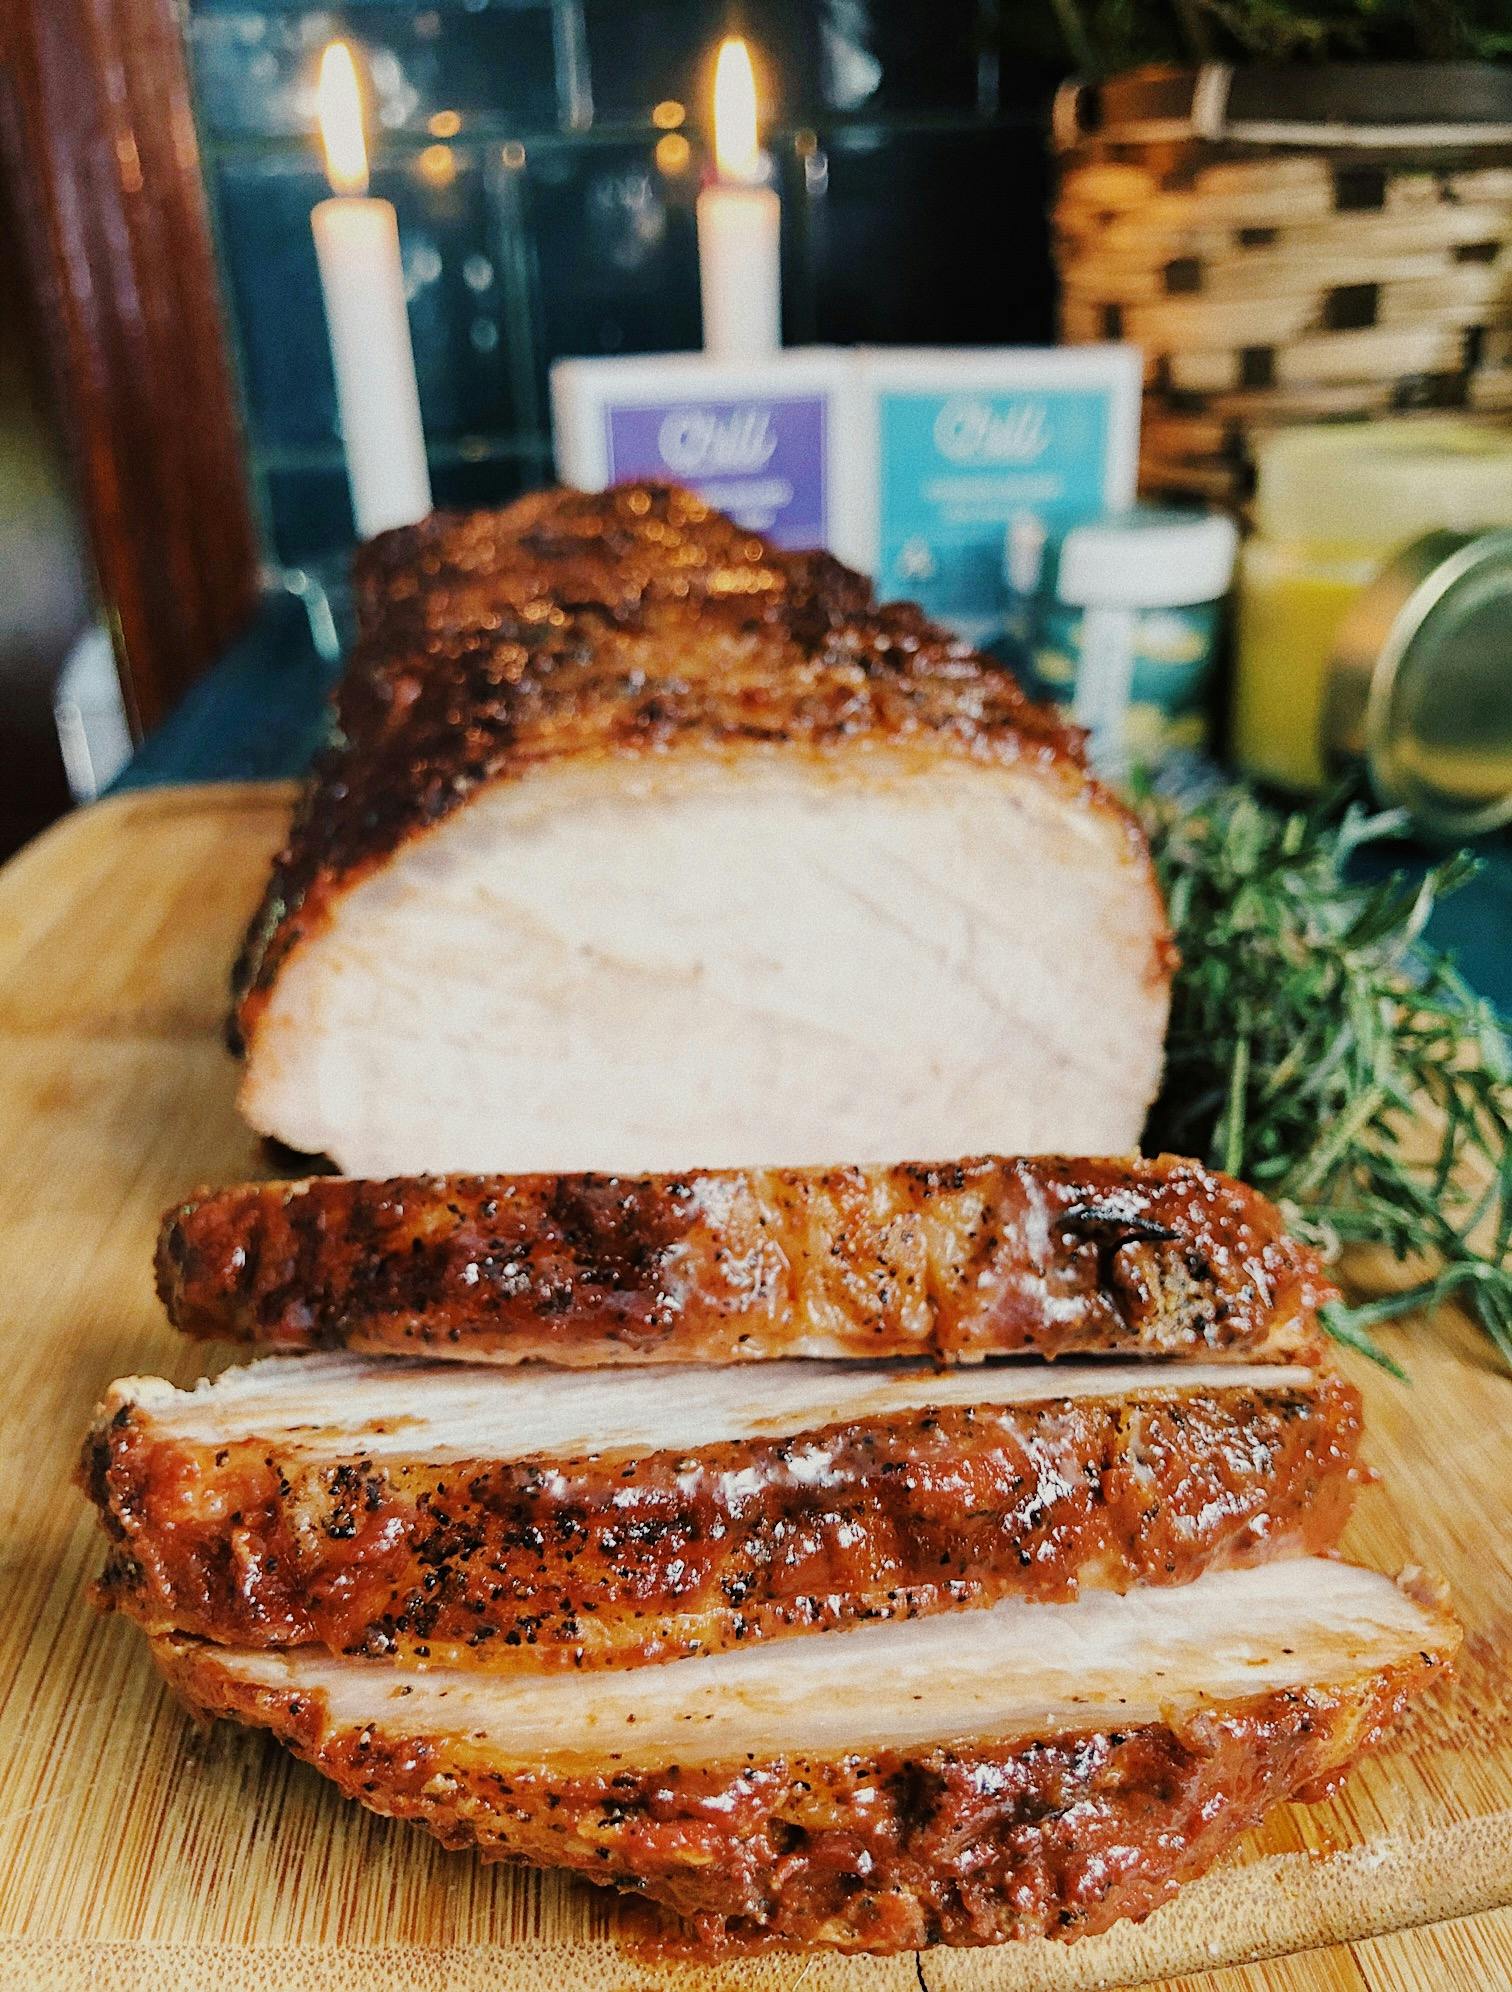 Cannabis-infused pork loin roast with chocolate barbecue sauce